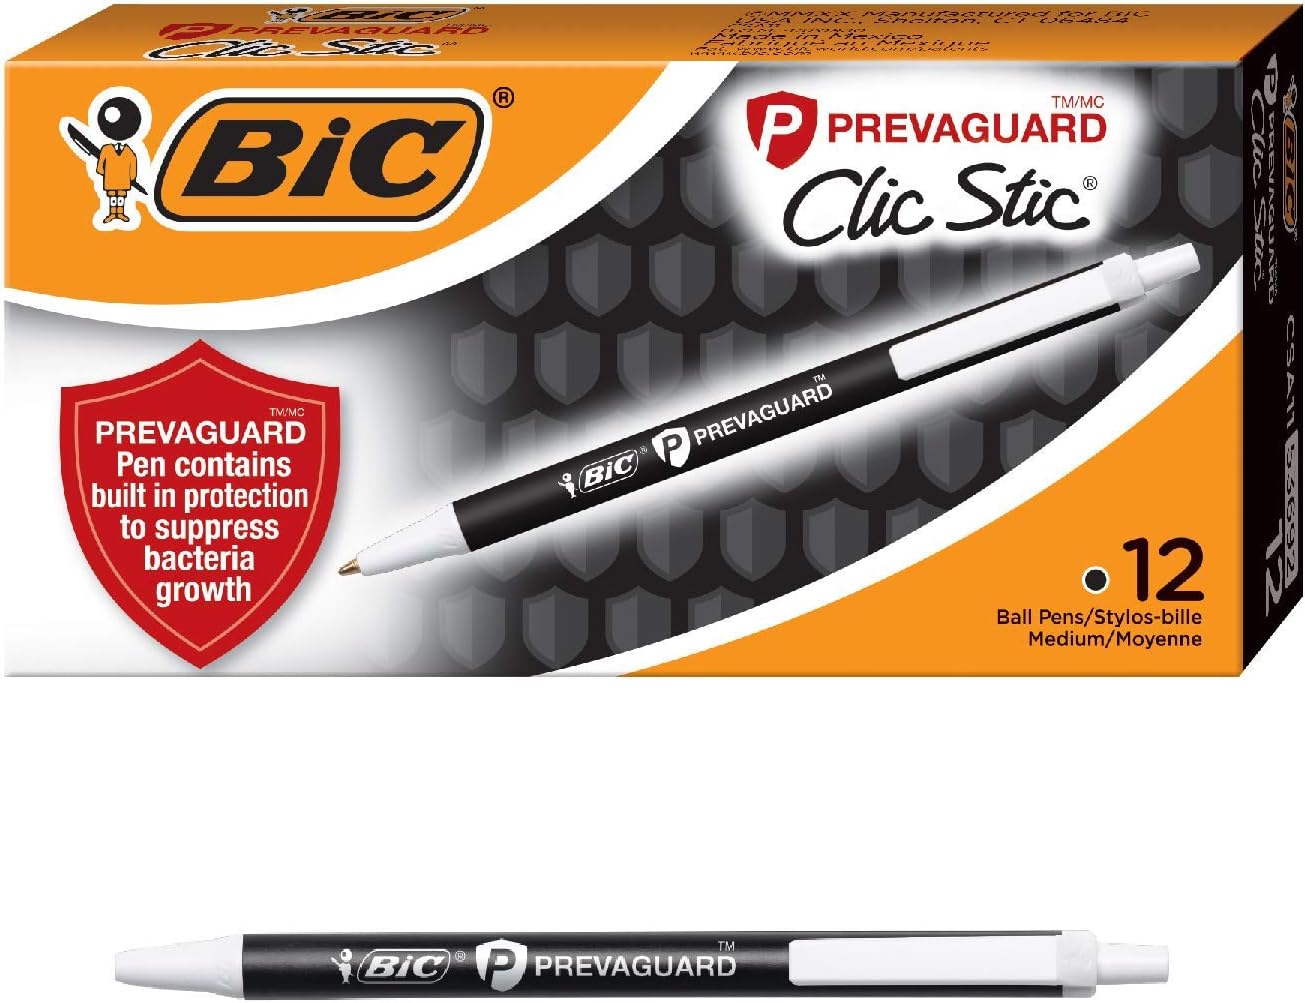 Writes smoothly, nothing spectacular about this pen, just a normal, easy to write with black ink pen. I got them on sale and it was a large box for a great price. I write a lot and these are perfect, especially when a coworker wants to borrow a pen I don't feel bad if I don't get it back.